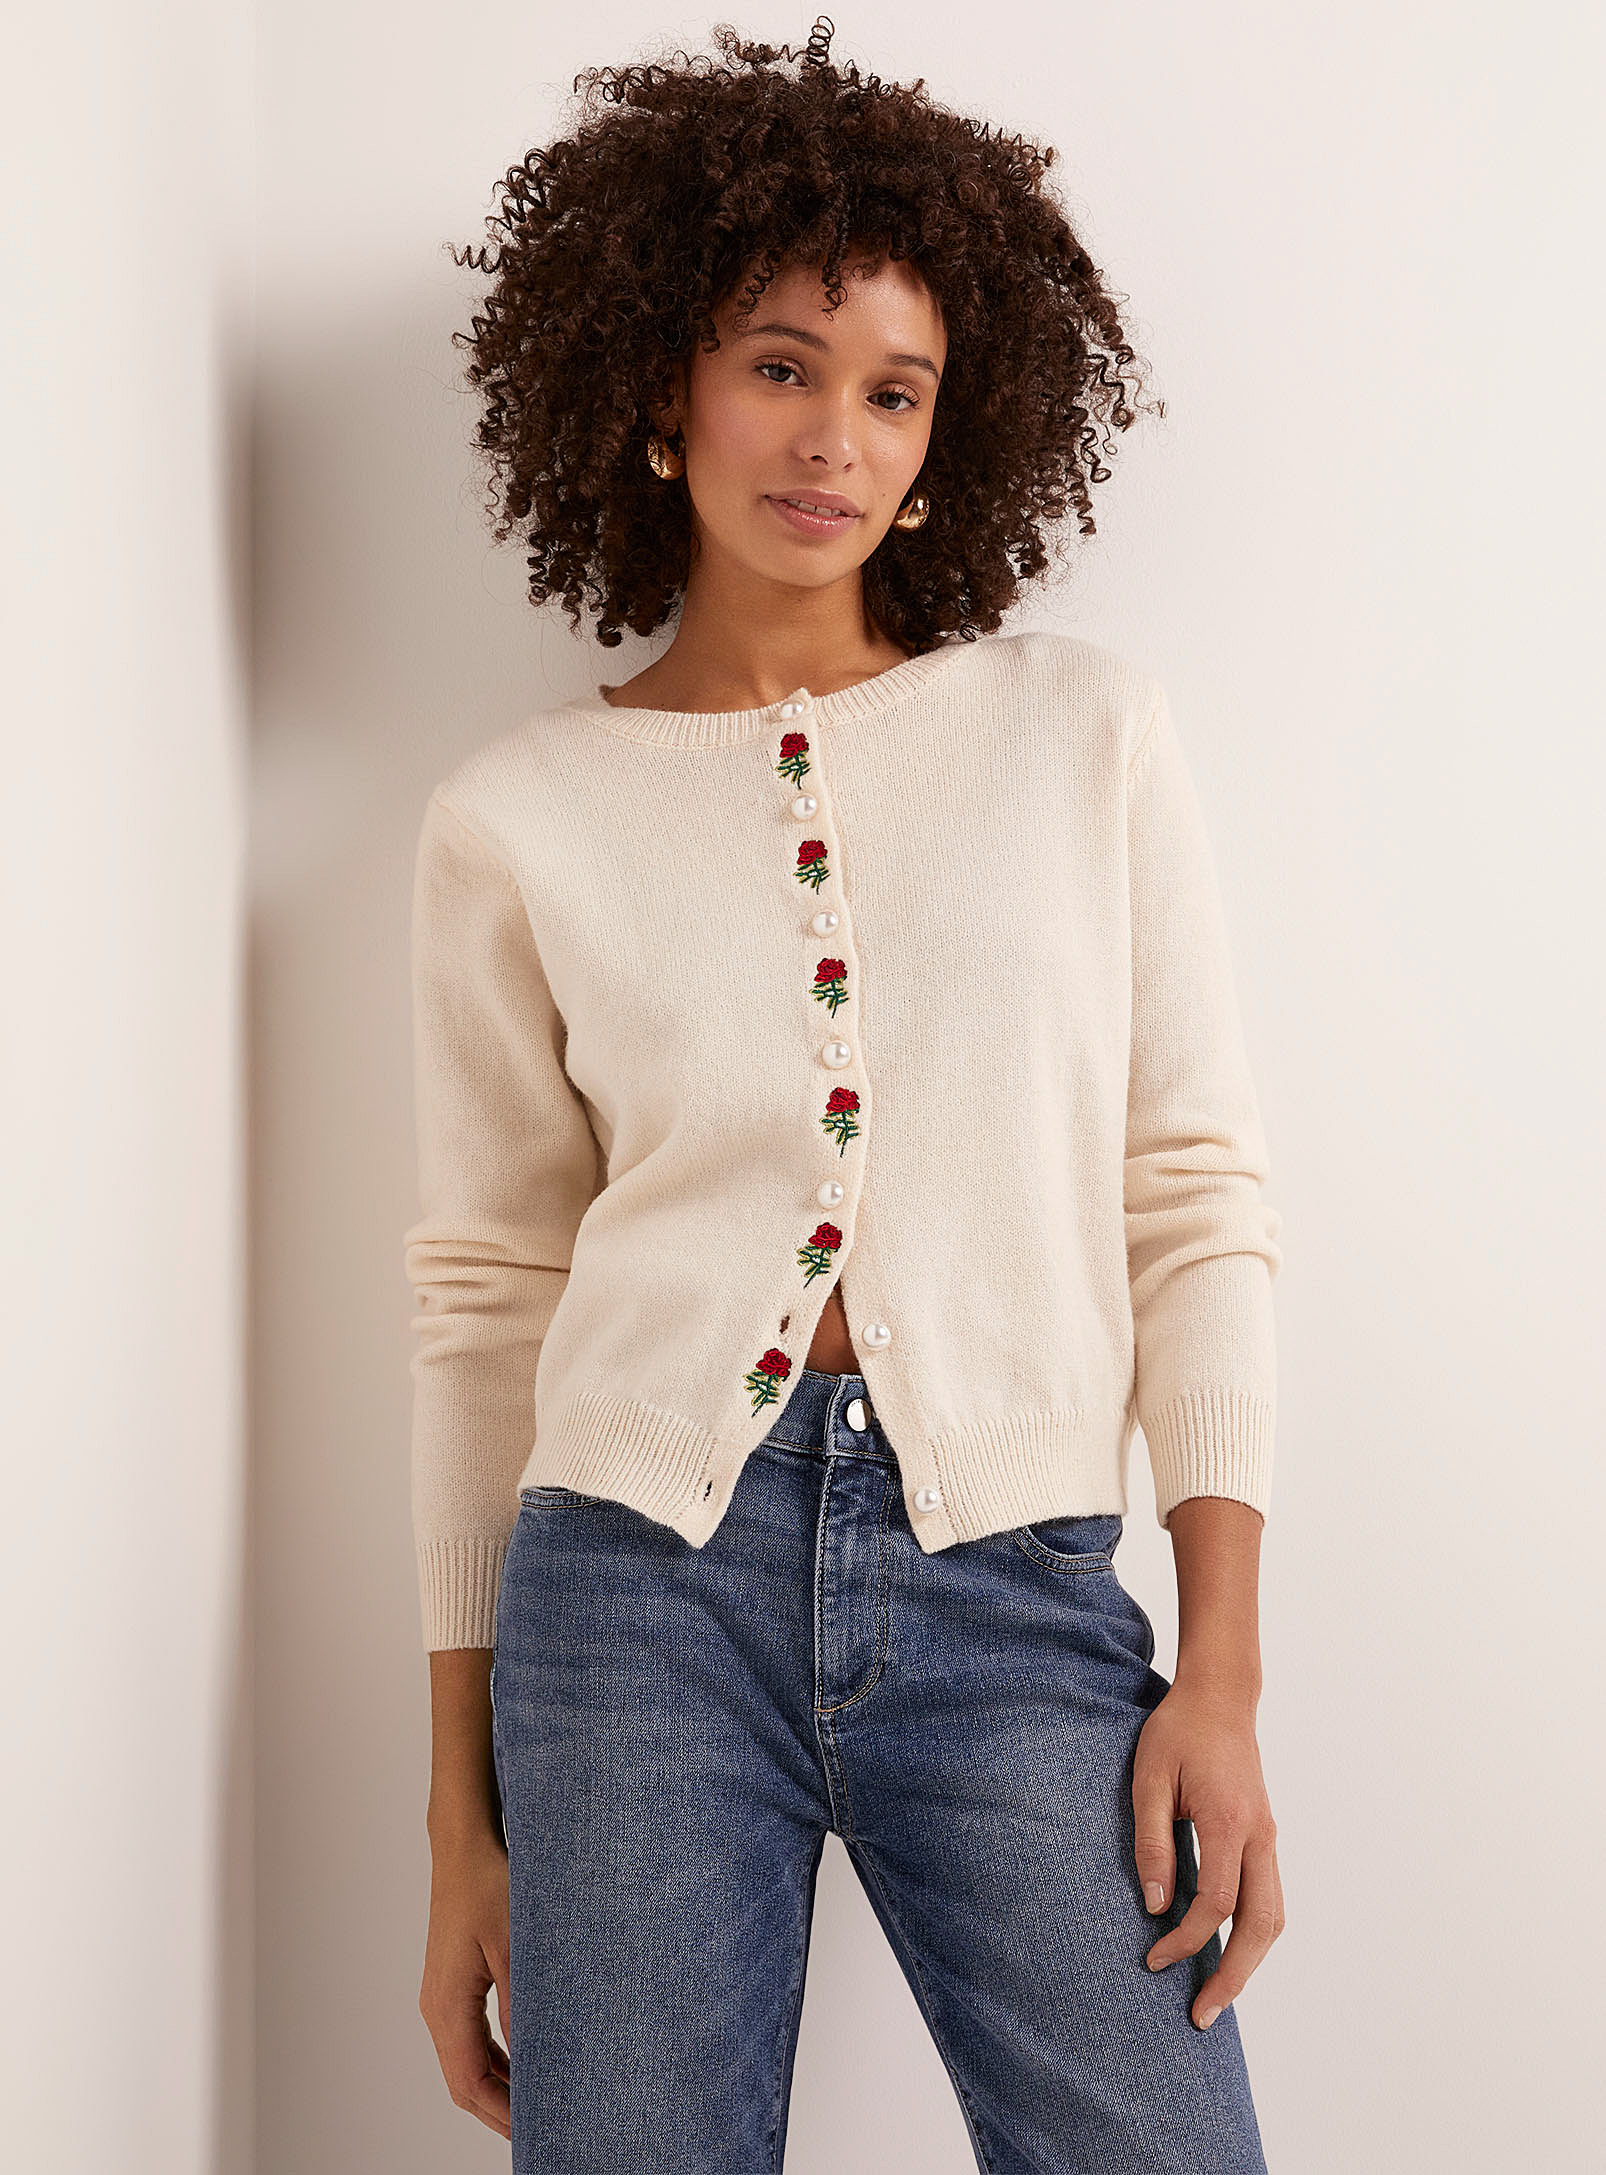 Contemporaine - Women's Roses and pearls Cardigan Sweater